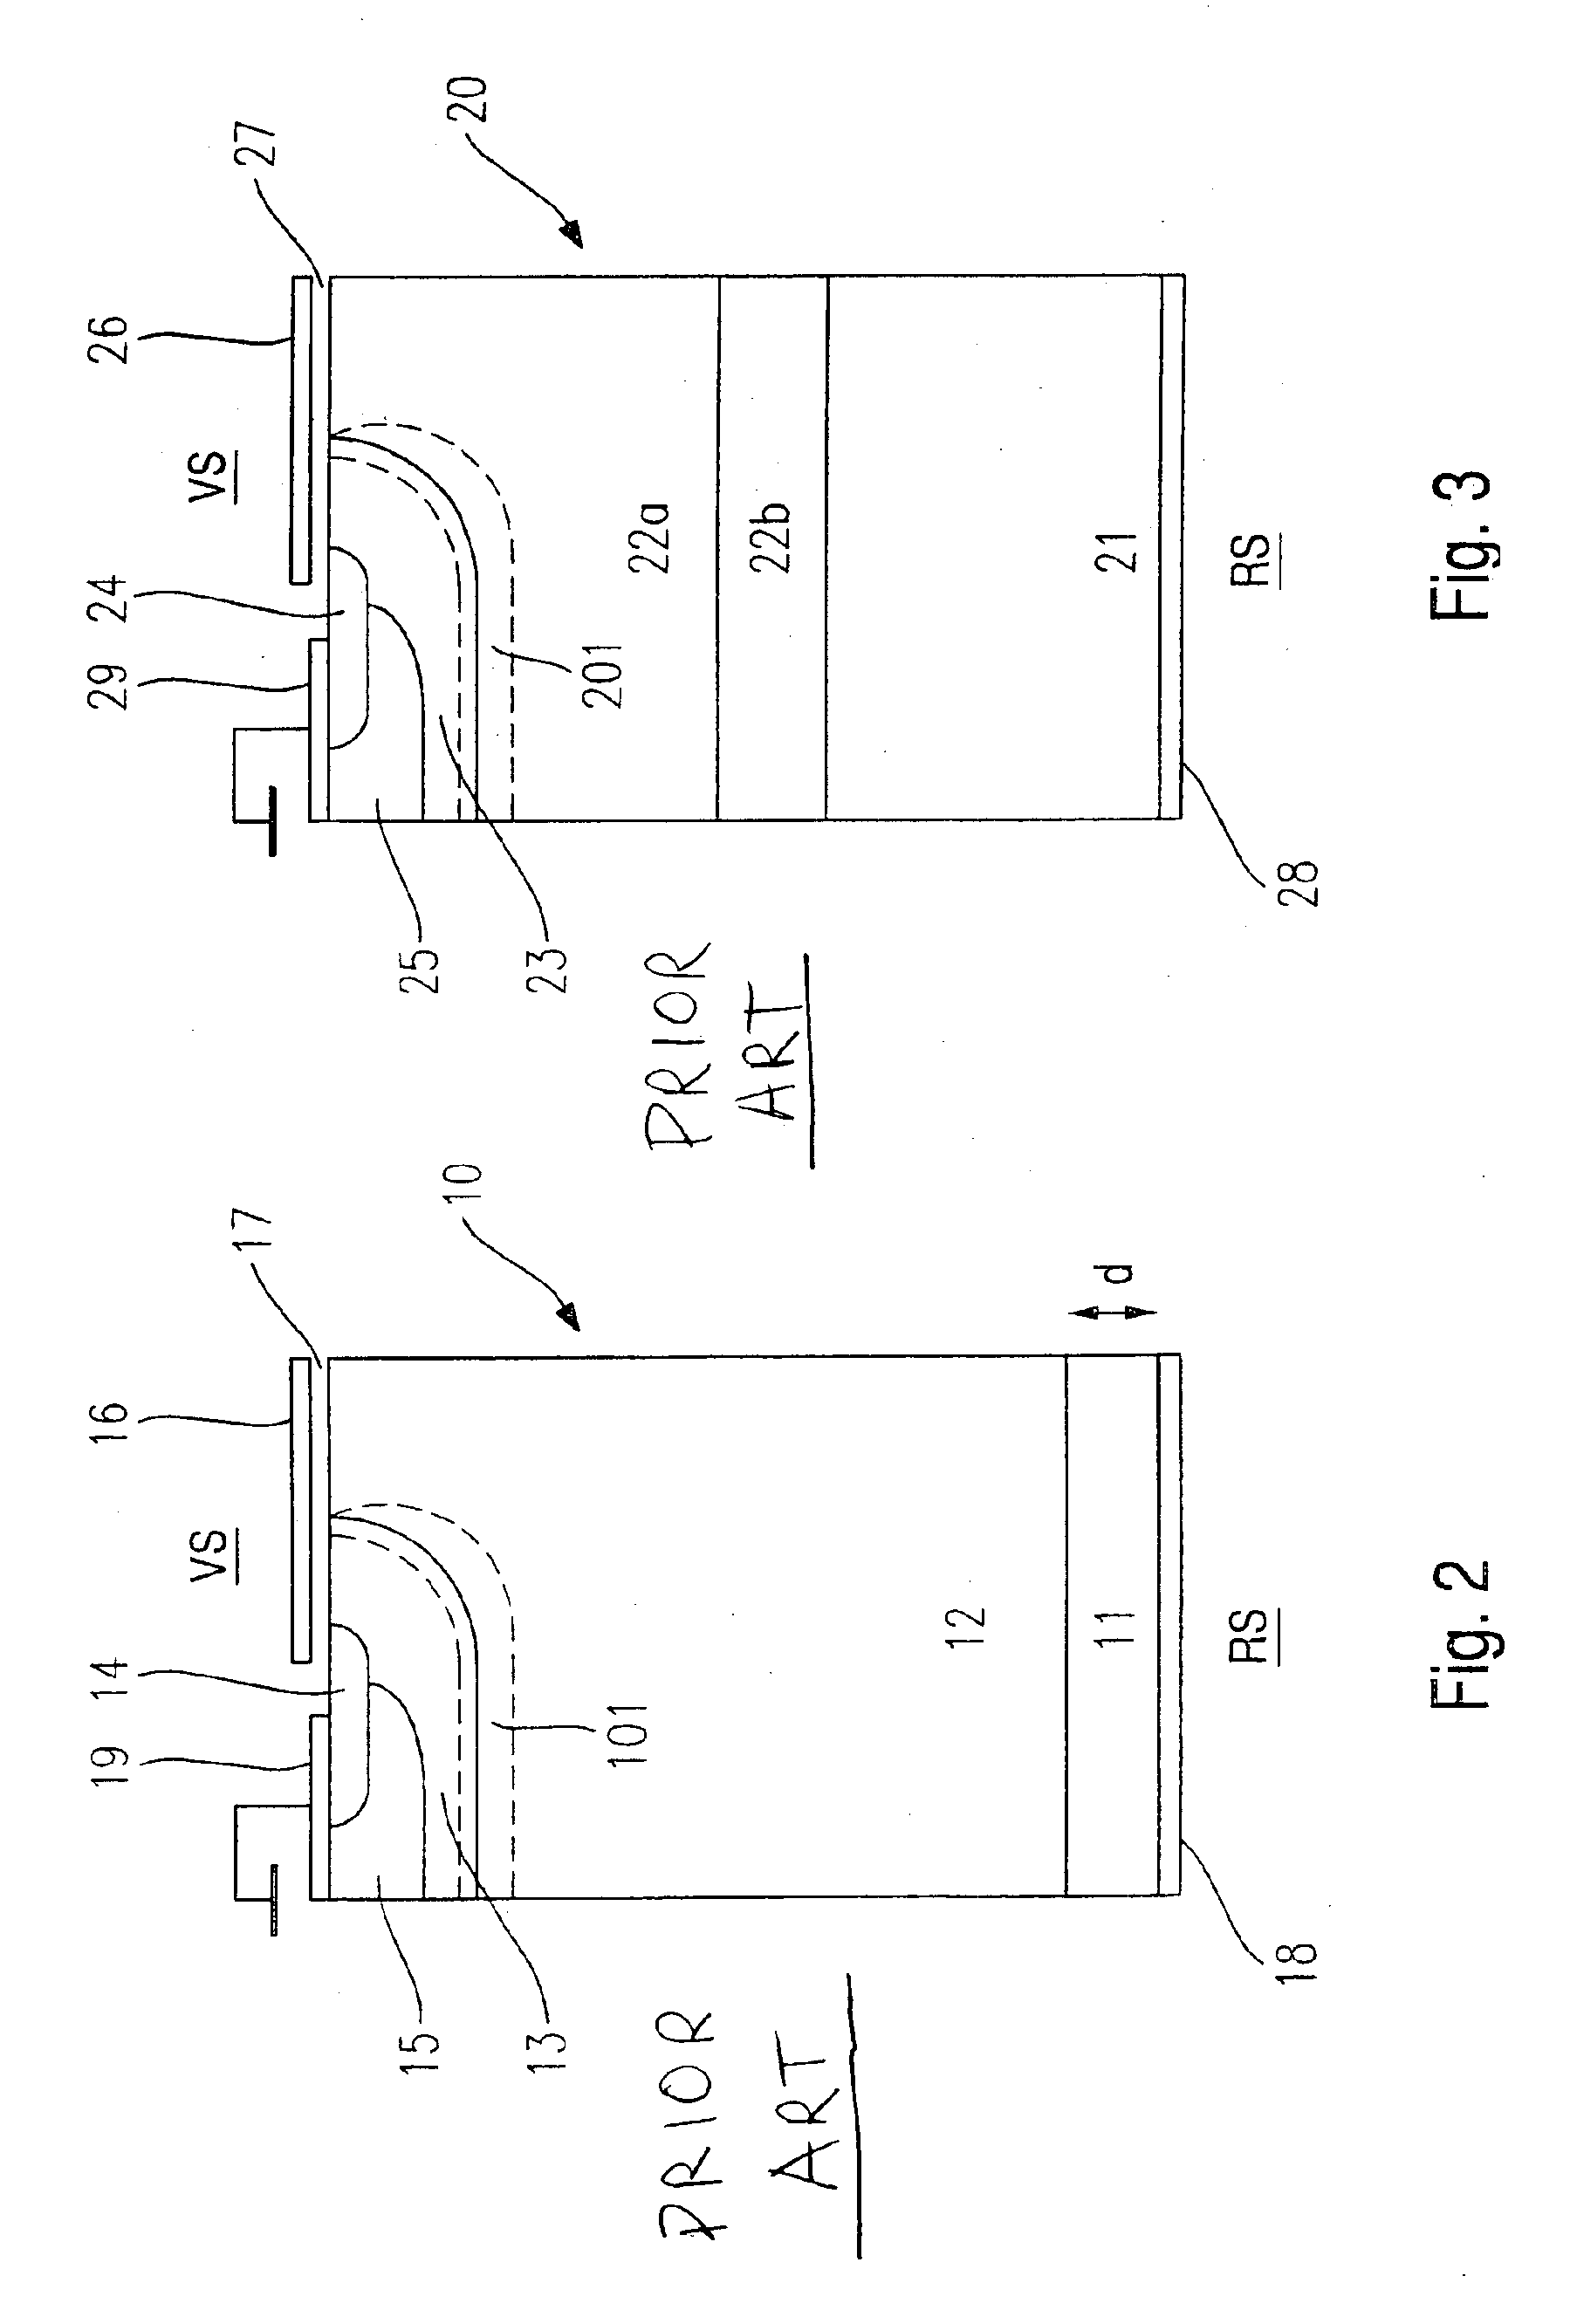 Semiconductor power component and a method of producing same